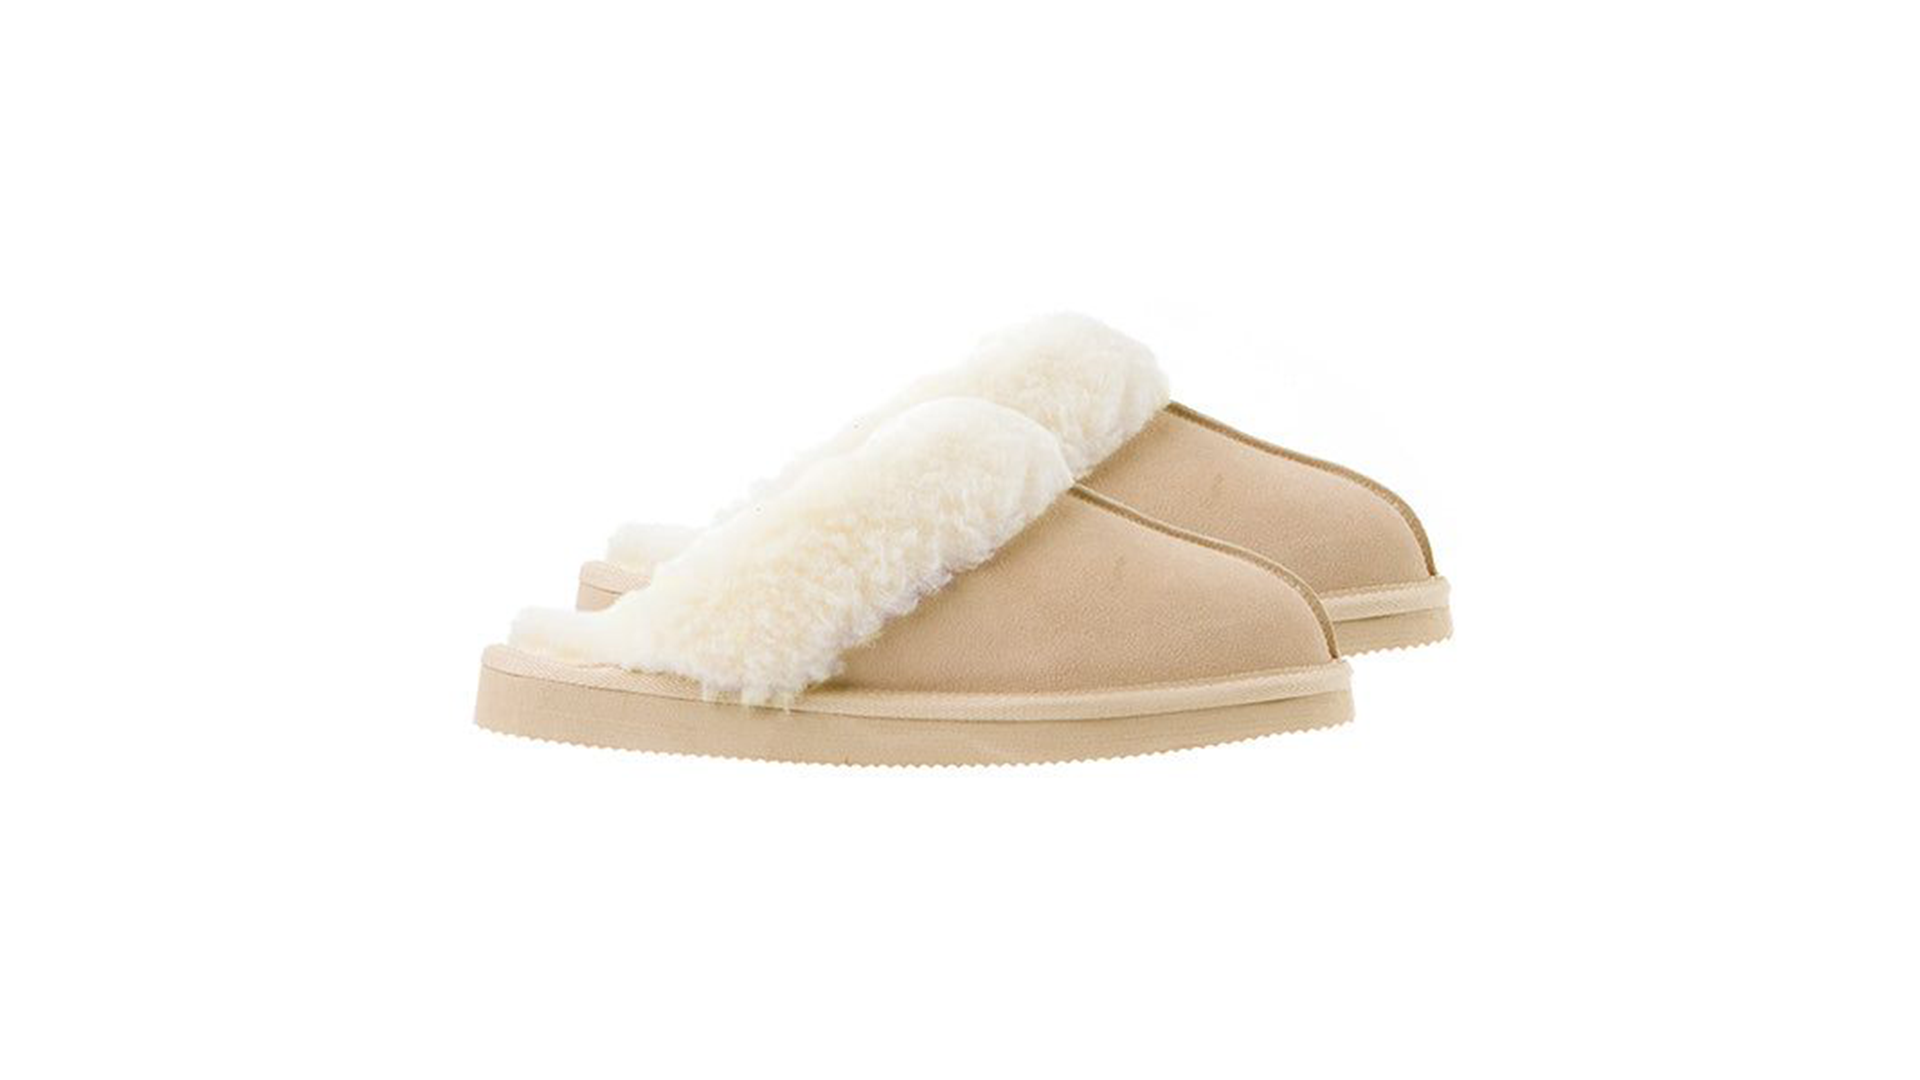 Beige slippers with a white wool lining.